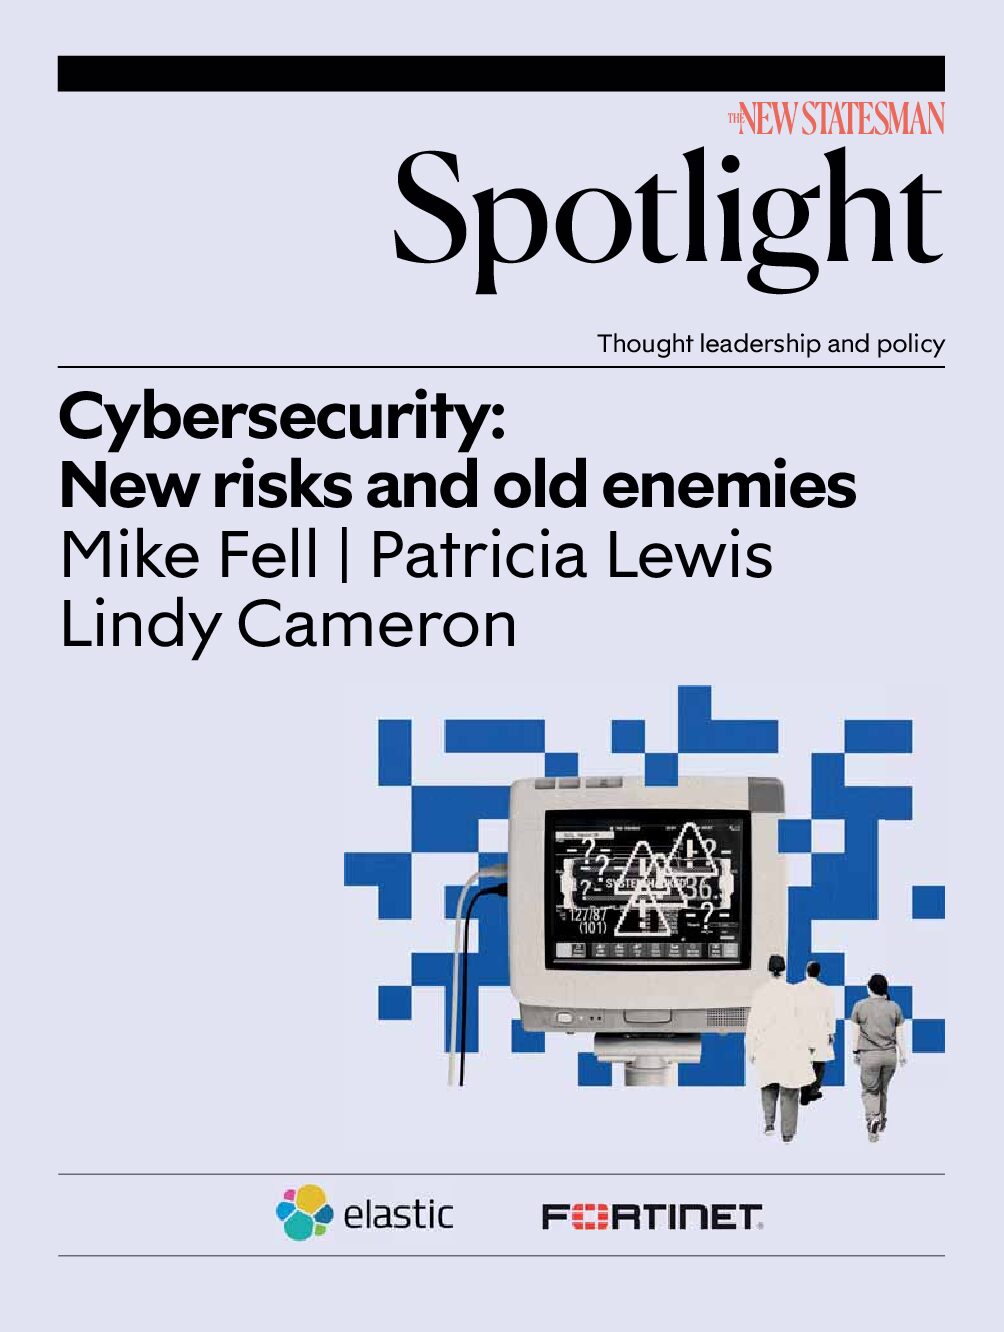 Cybersecurity: New risks and old enemies